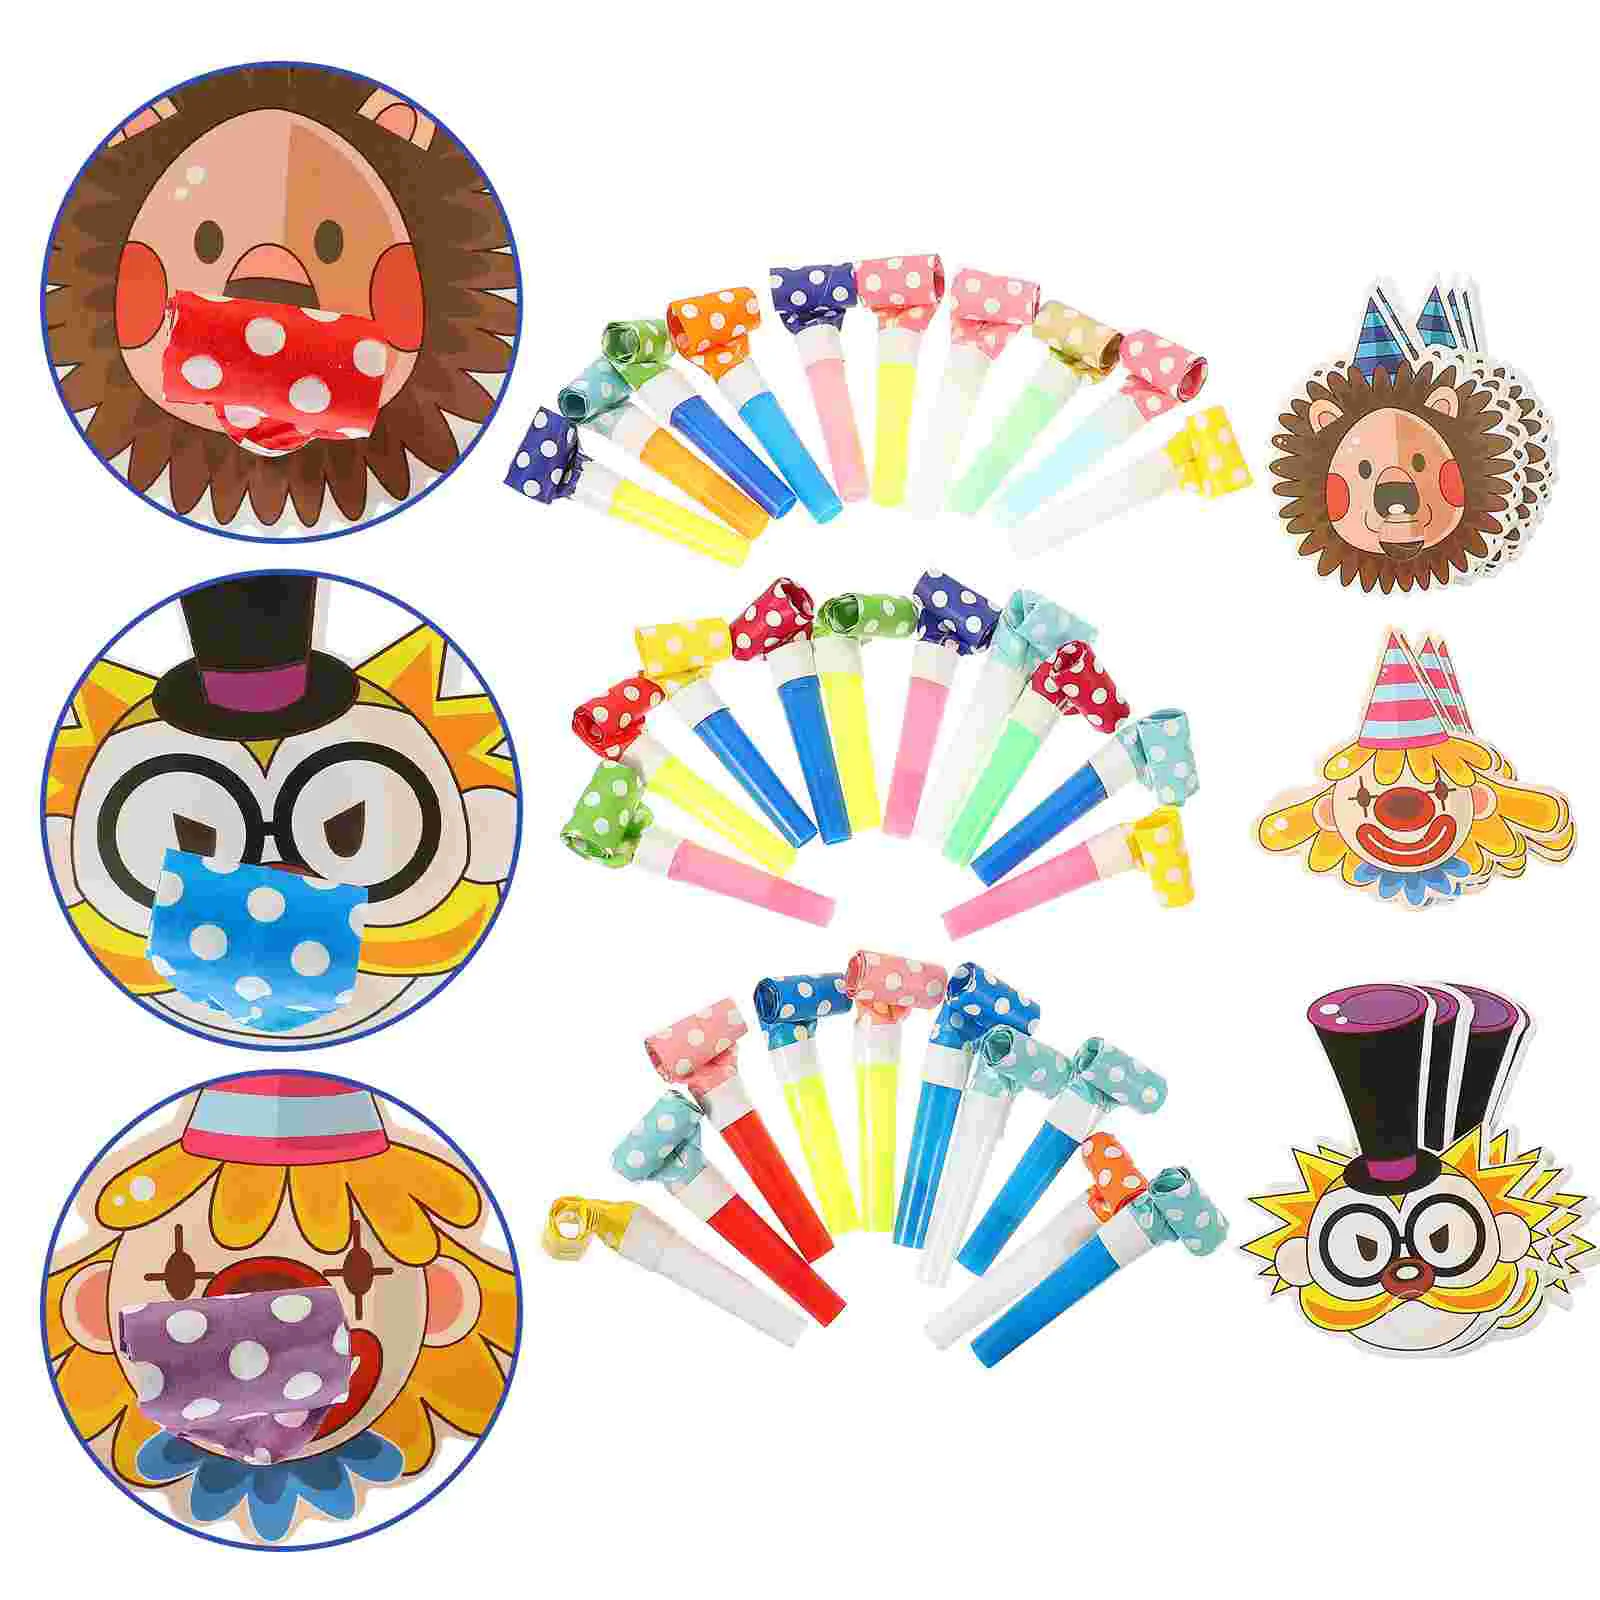 

30 Pcs Cartoon Blowing Dragon Kid Toy Blowouts Noisemakers Party Blowers Kids Props Childrens Toys Plastic